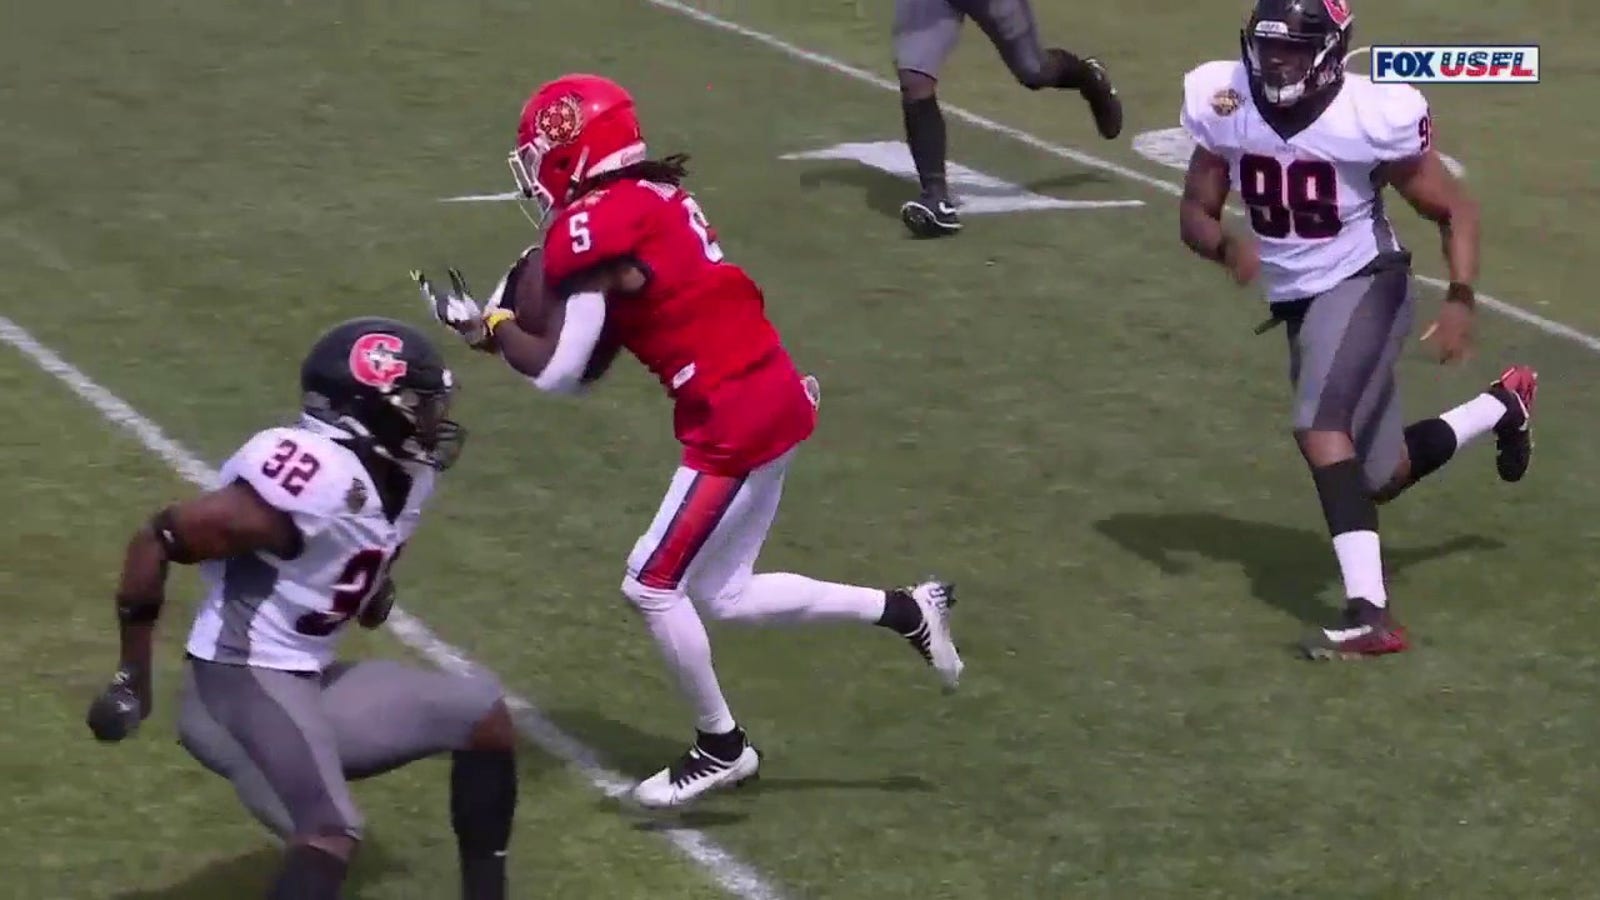 KaVontae Turpin shakes-and-bakes to the end zone